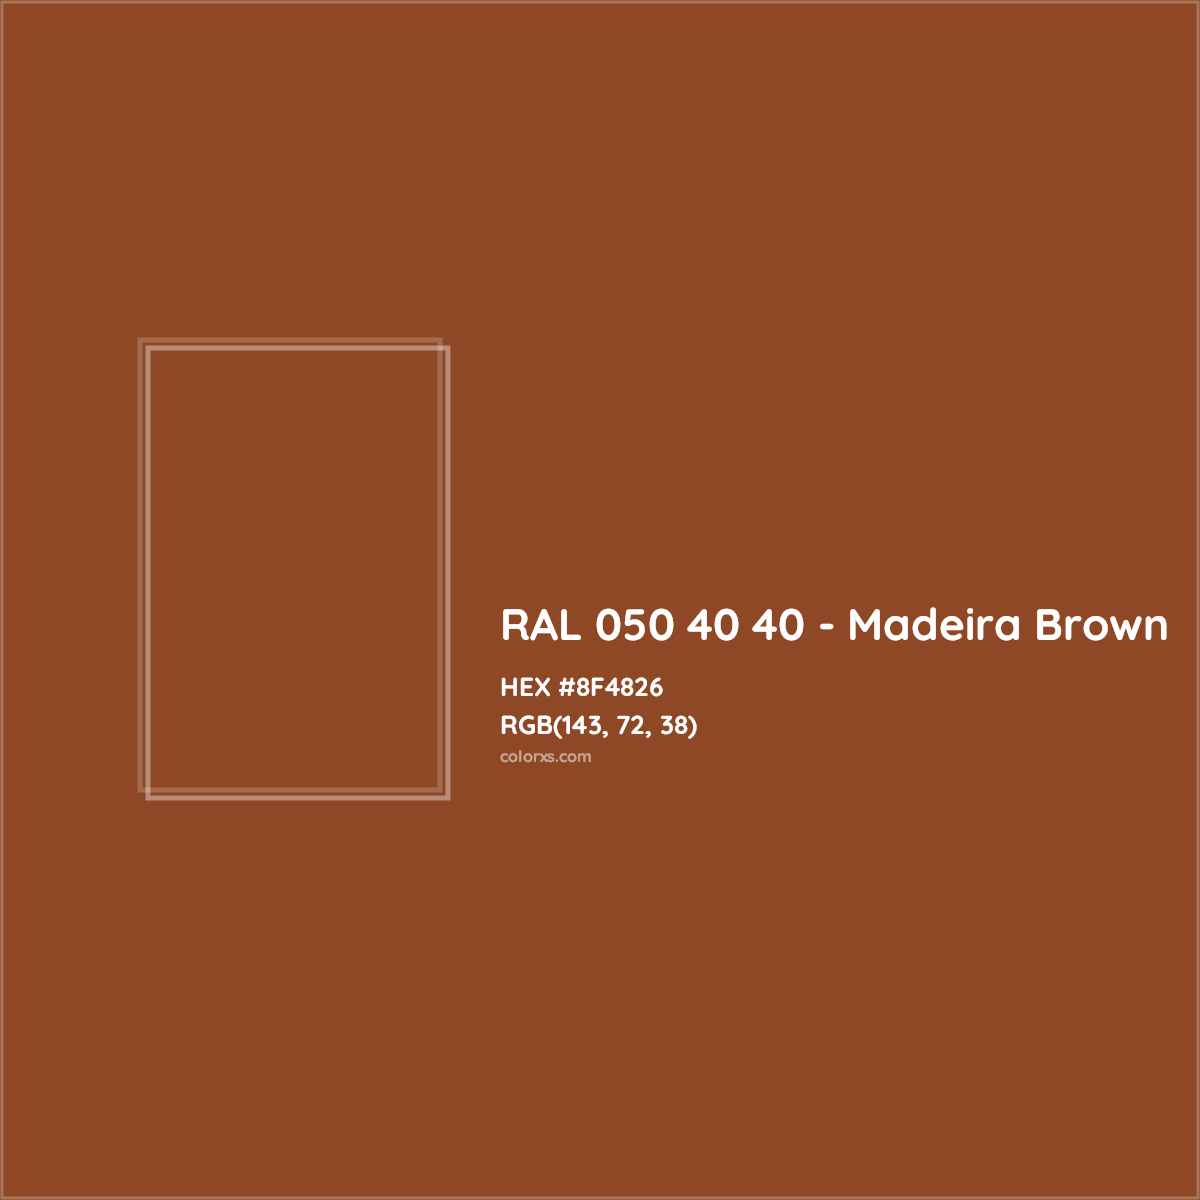 HEX #8F4826 RAL 050 40 40 - Madeira Brown CMS RAL Design - Color Code